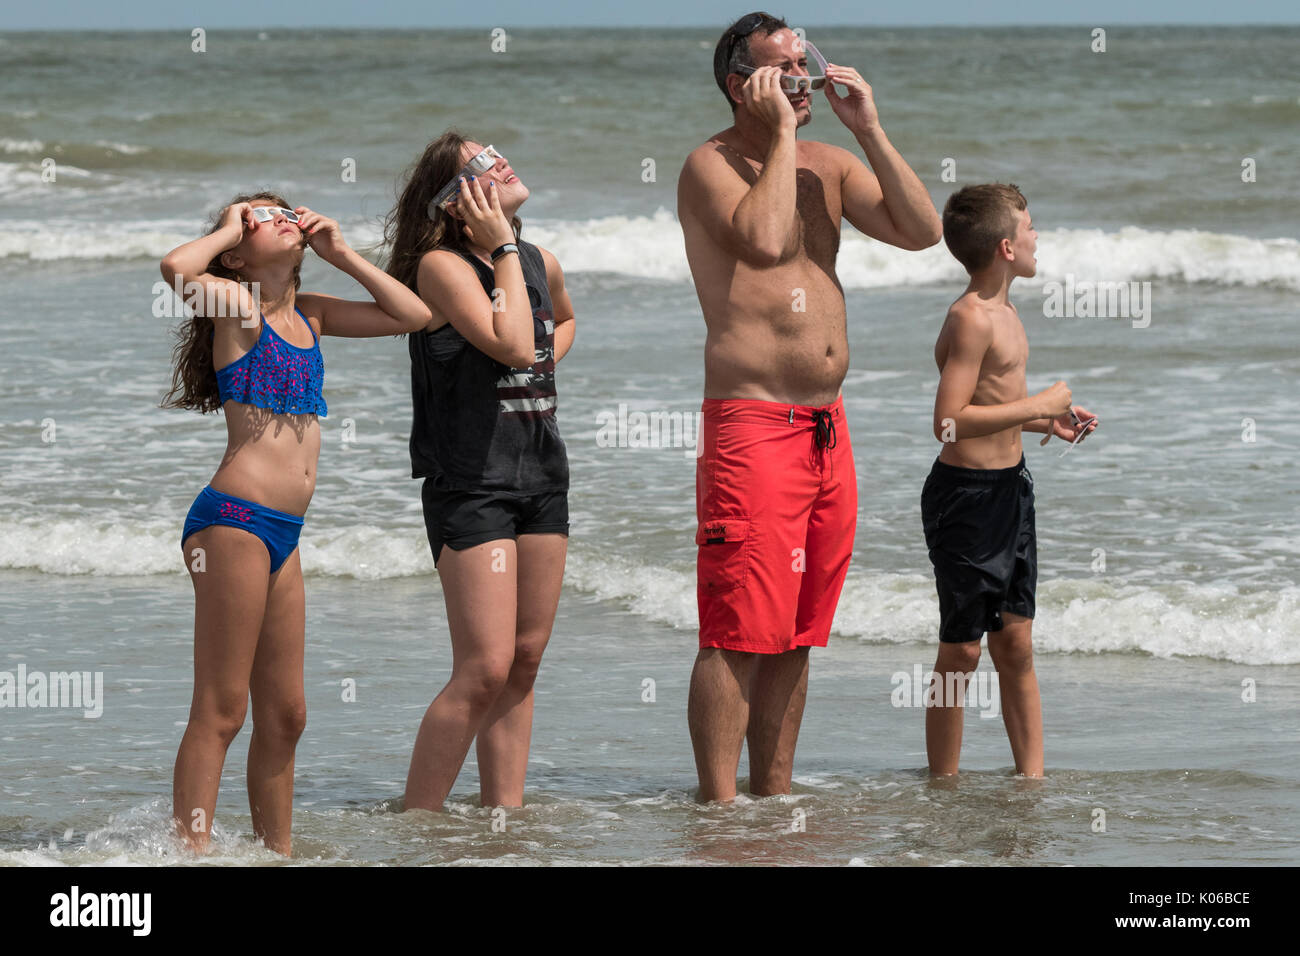 Charleston, Isle of Palms, USA. 21st Aug, 2017. A family stands in the water as they view the total solar eclipse as it passes over the beach outside Charleston August 21, 2017 in Isle of Palms, South Carolina. The solar eclipse after sweeping across the nation crosses the Charleston area before heading over the Atlantic Ocean. Credit: Planetpix/Alamy Live News Stock Photo